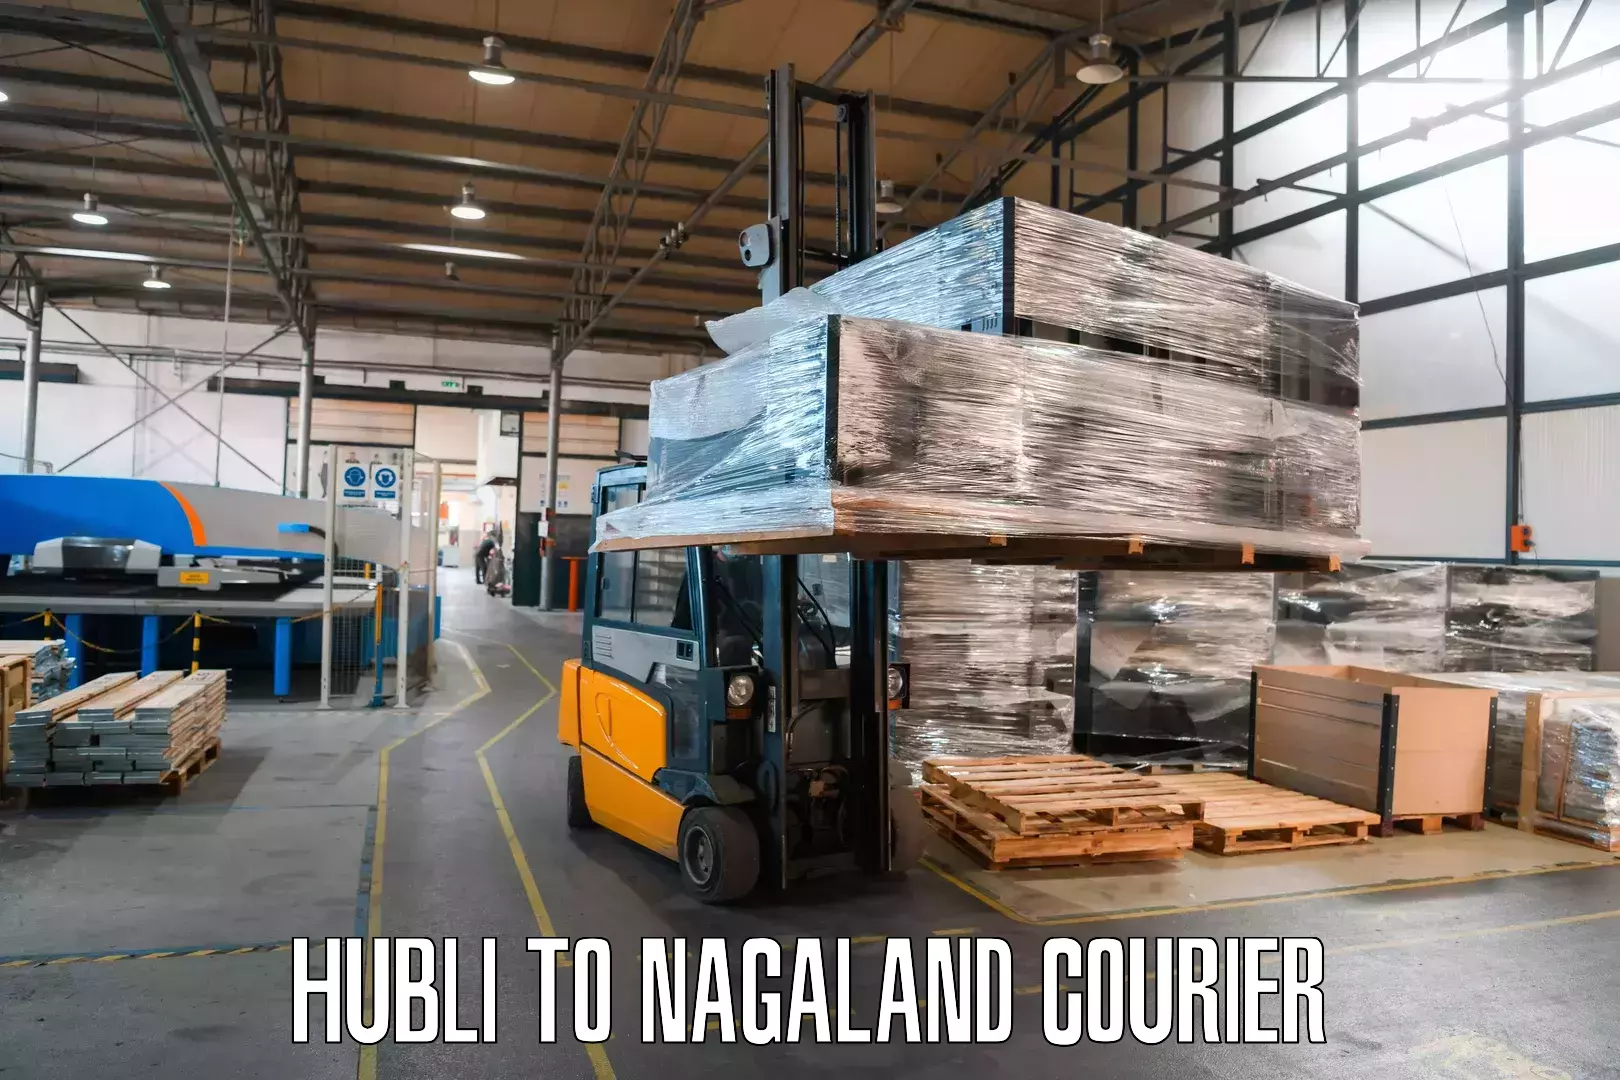 Flexible delivery schedules in Hubli to Nagaland